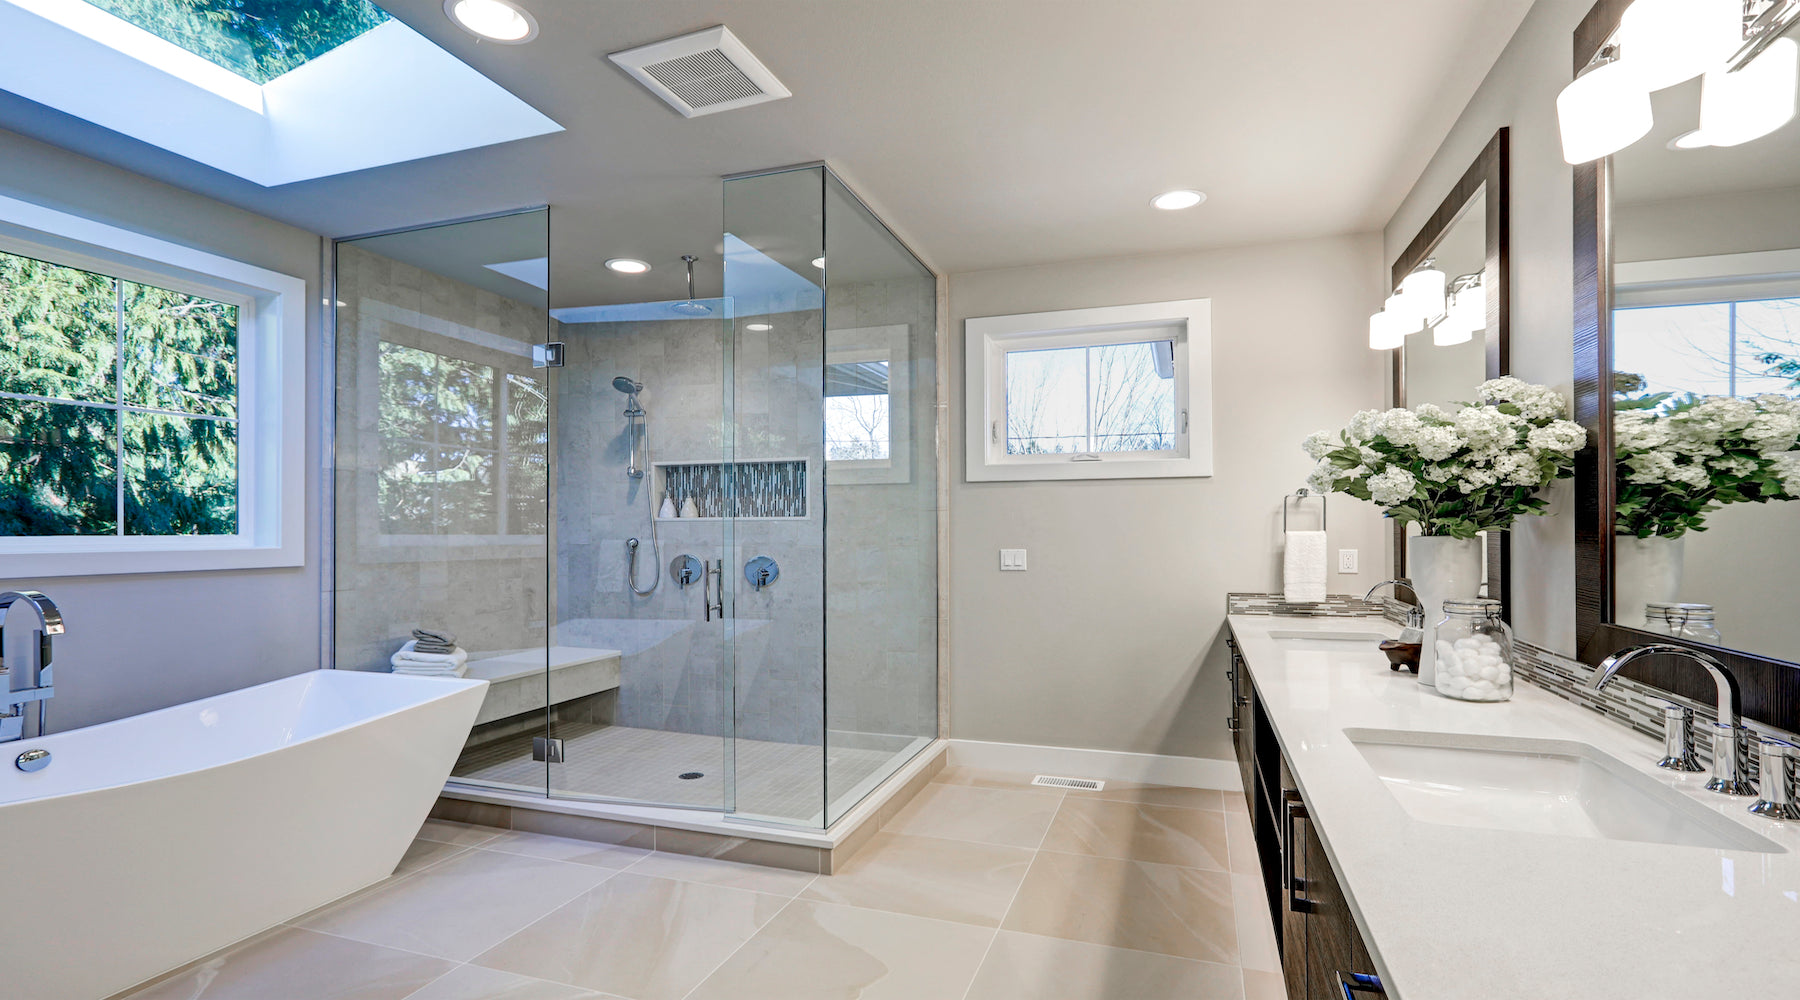 Shower lighting installed in spacious bathroom with grey tones and heated floors